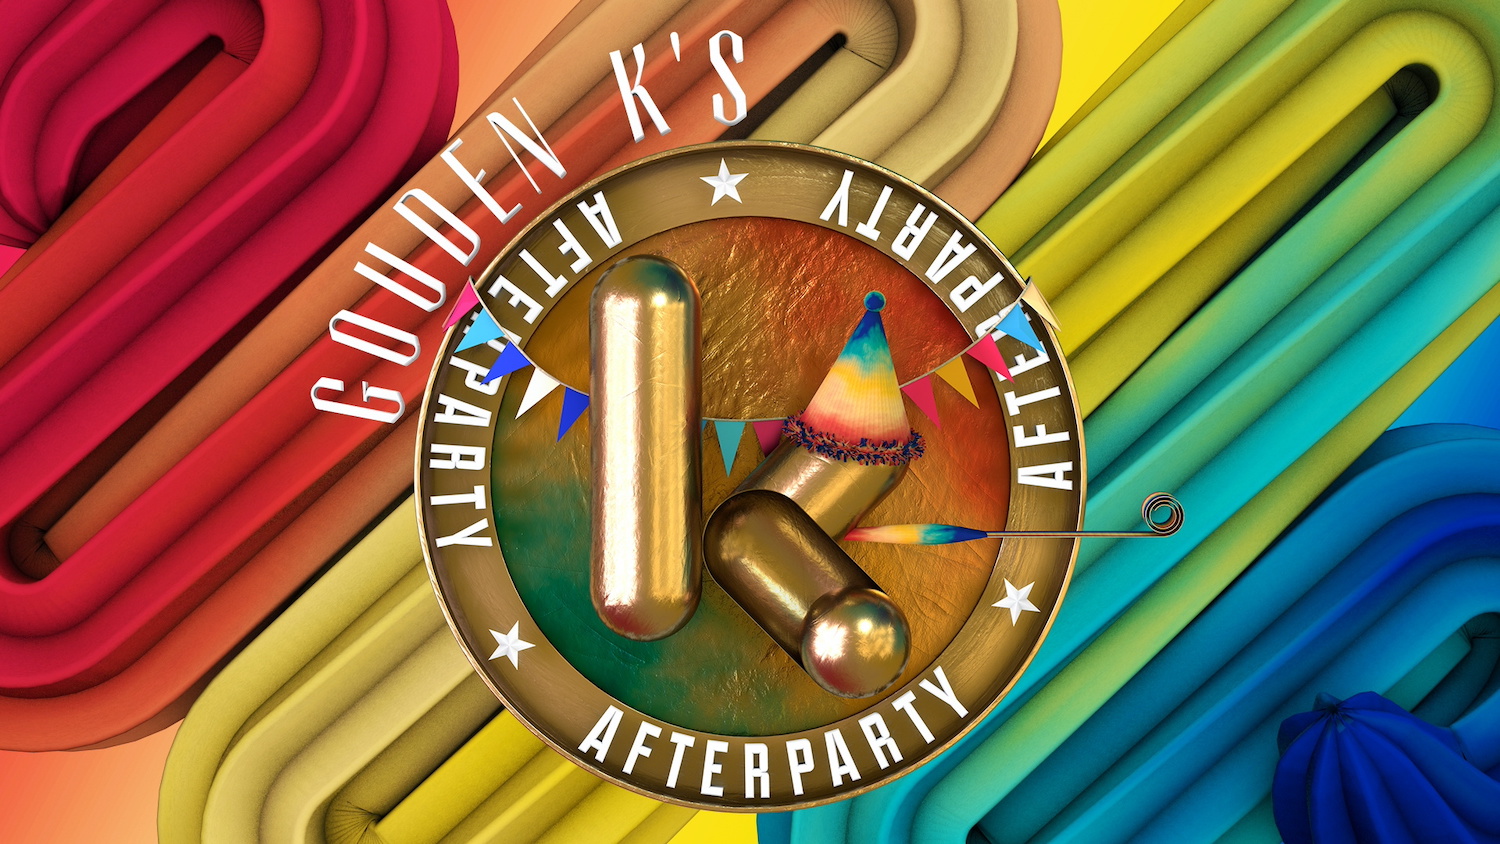 Gouden K's Afterparty